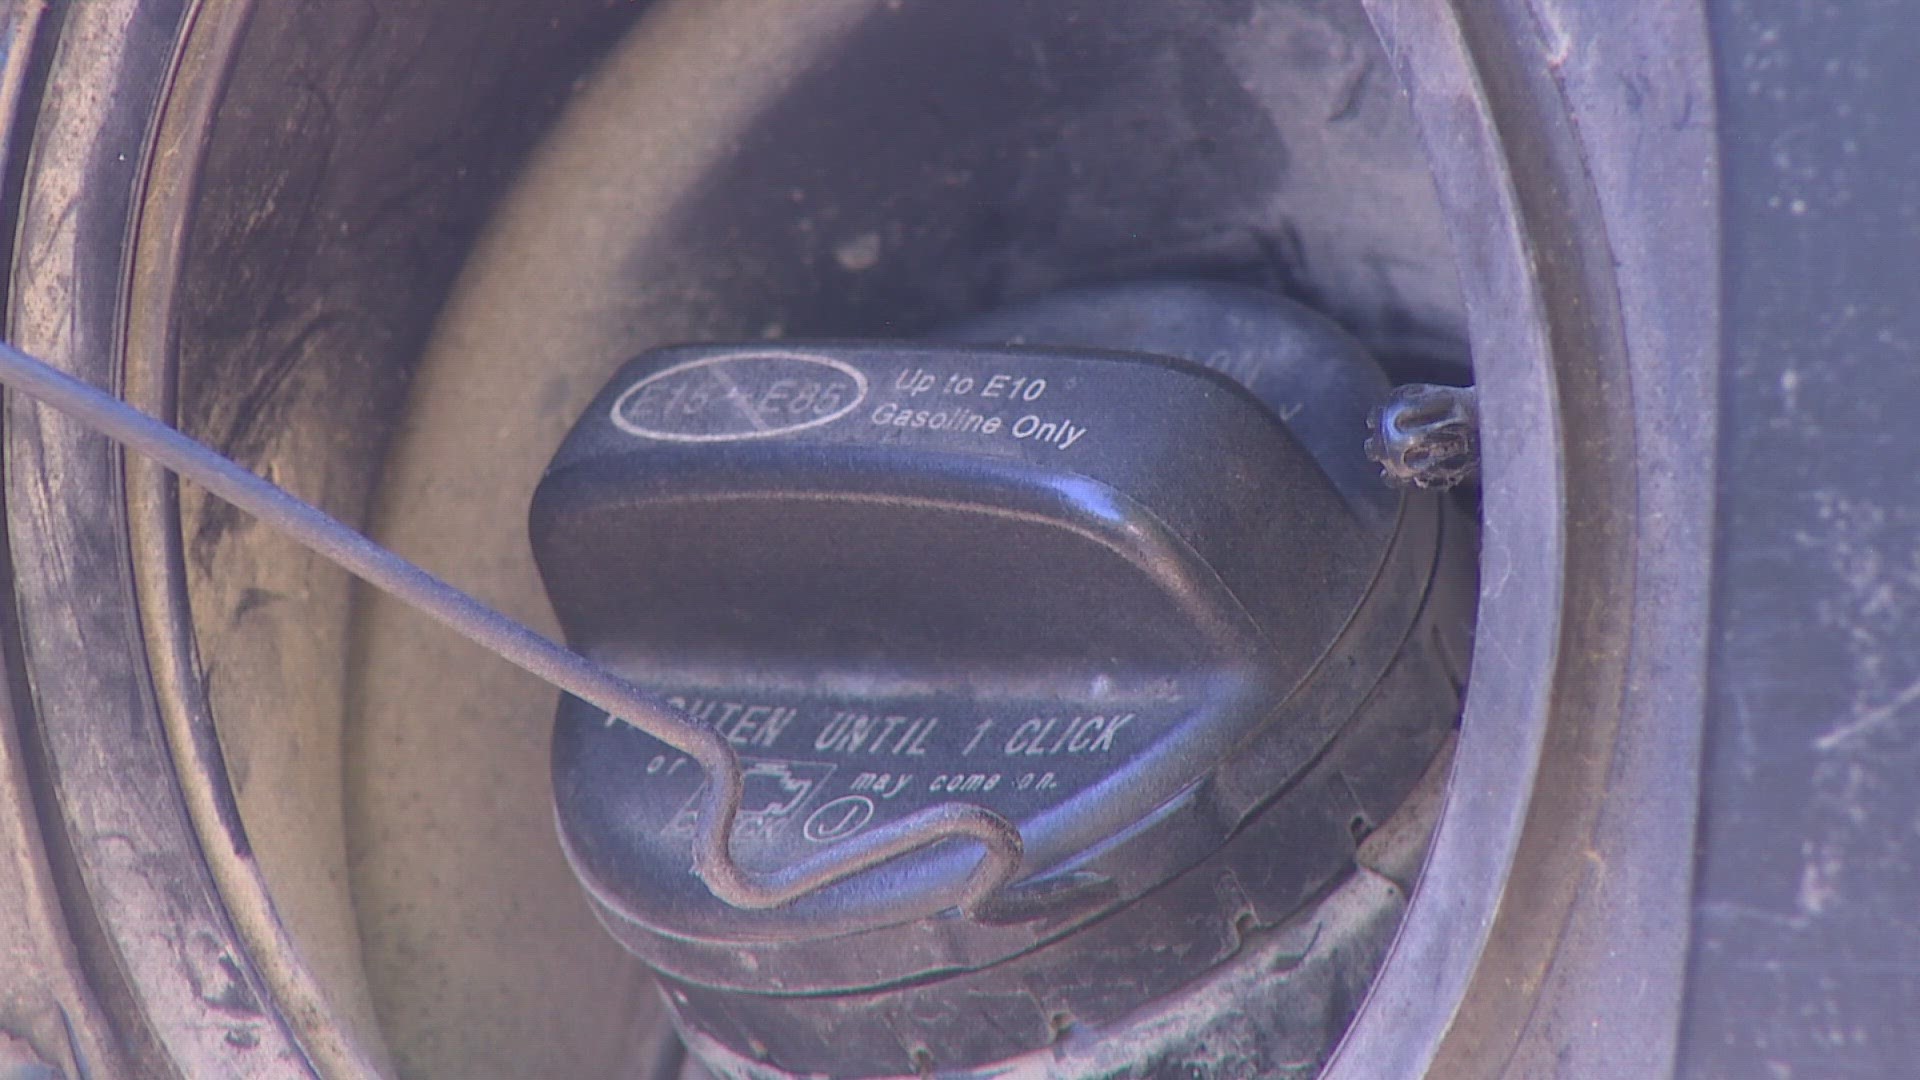 Repairing the gas tank can cost between $500-$1,500, according to AAA.